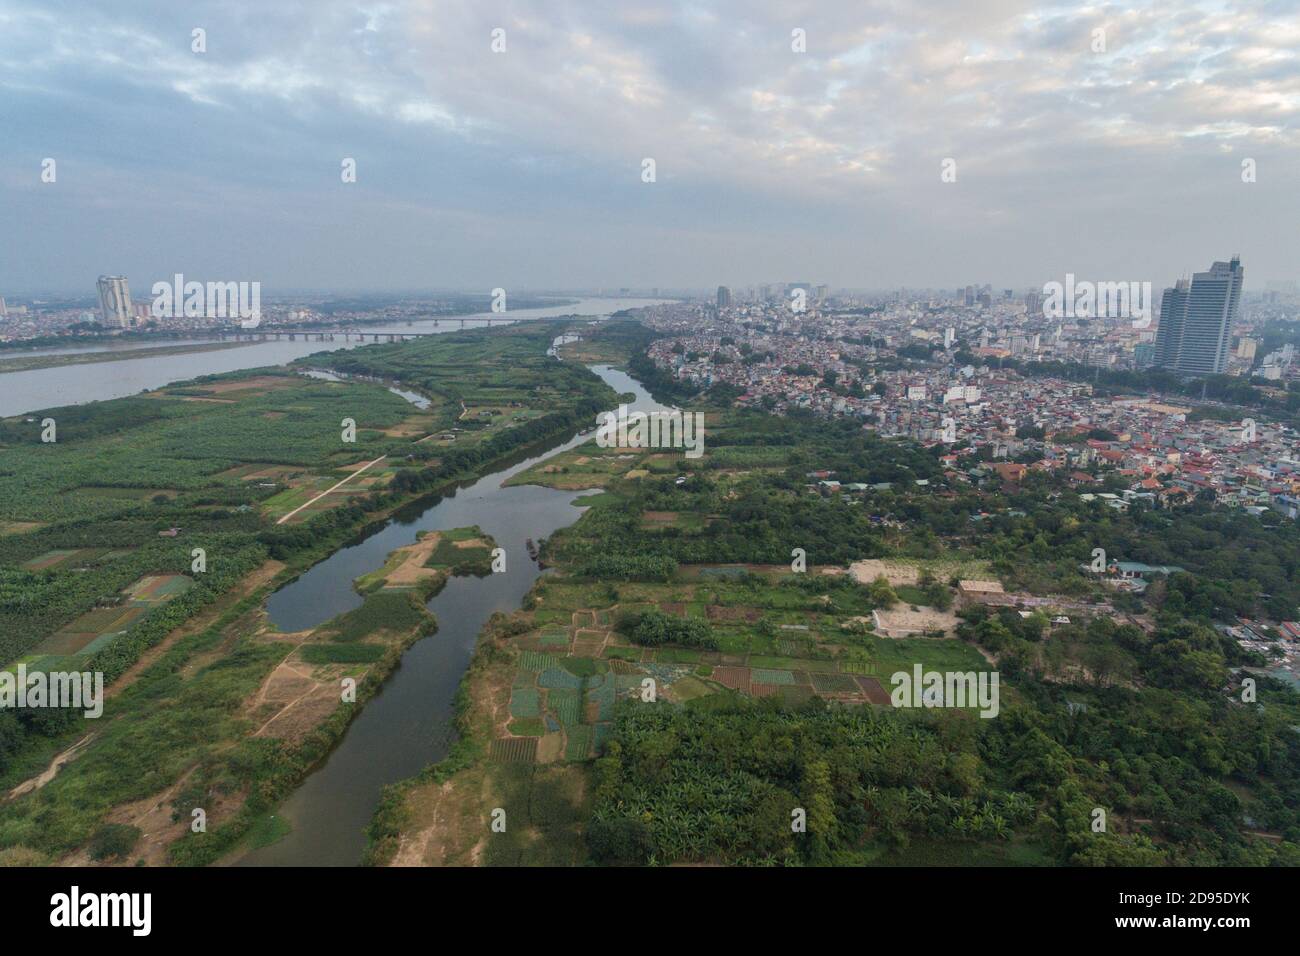 Hanoi City on Red River Delta in Vietnam Aerial Drone Photo view Stock Photo